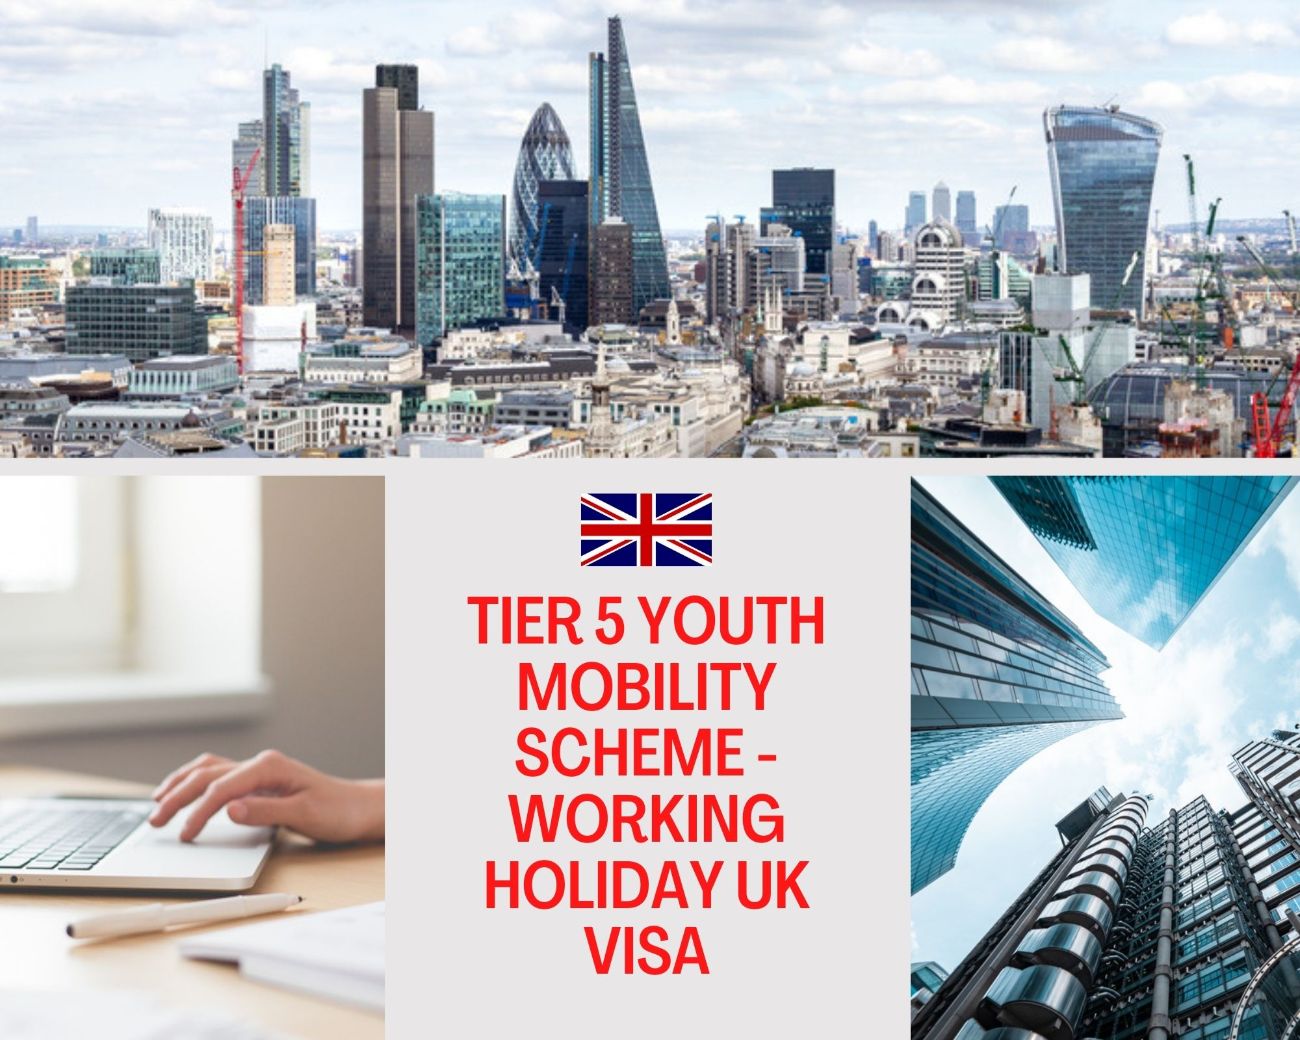 Tier 5 Youth Mobility Scheme - Working Holiday UK Visa